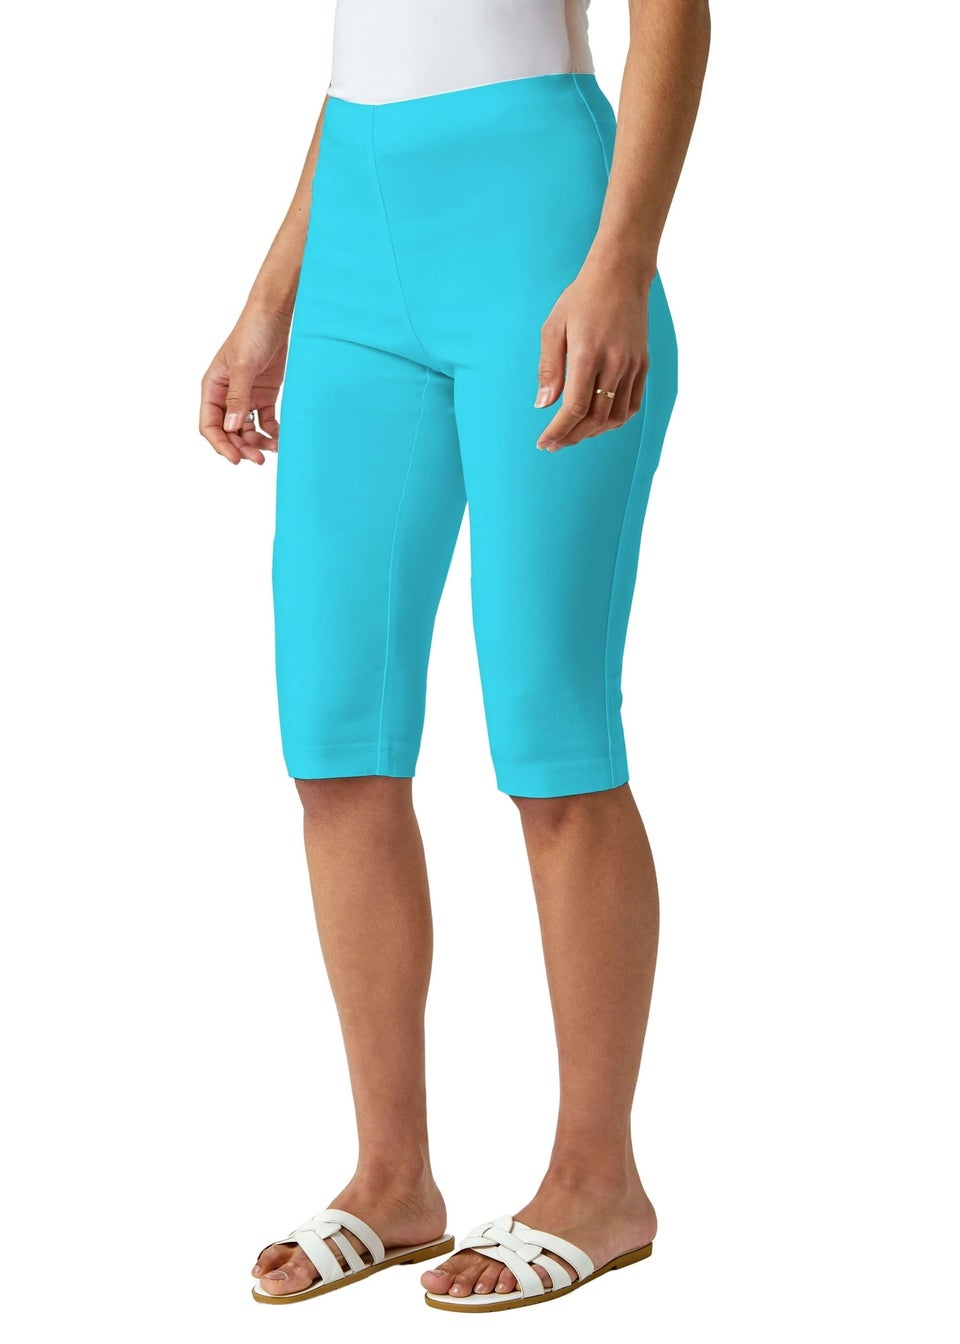 Roman Turquoise Knee Length Stretch Shorts